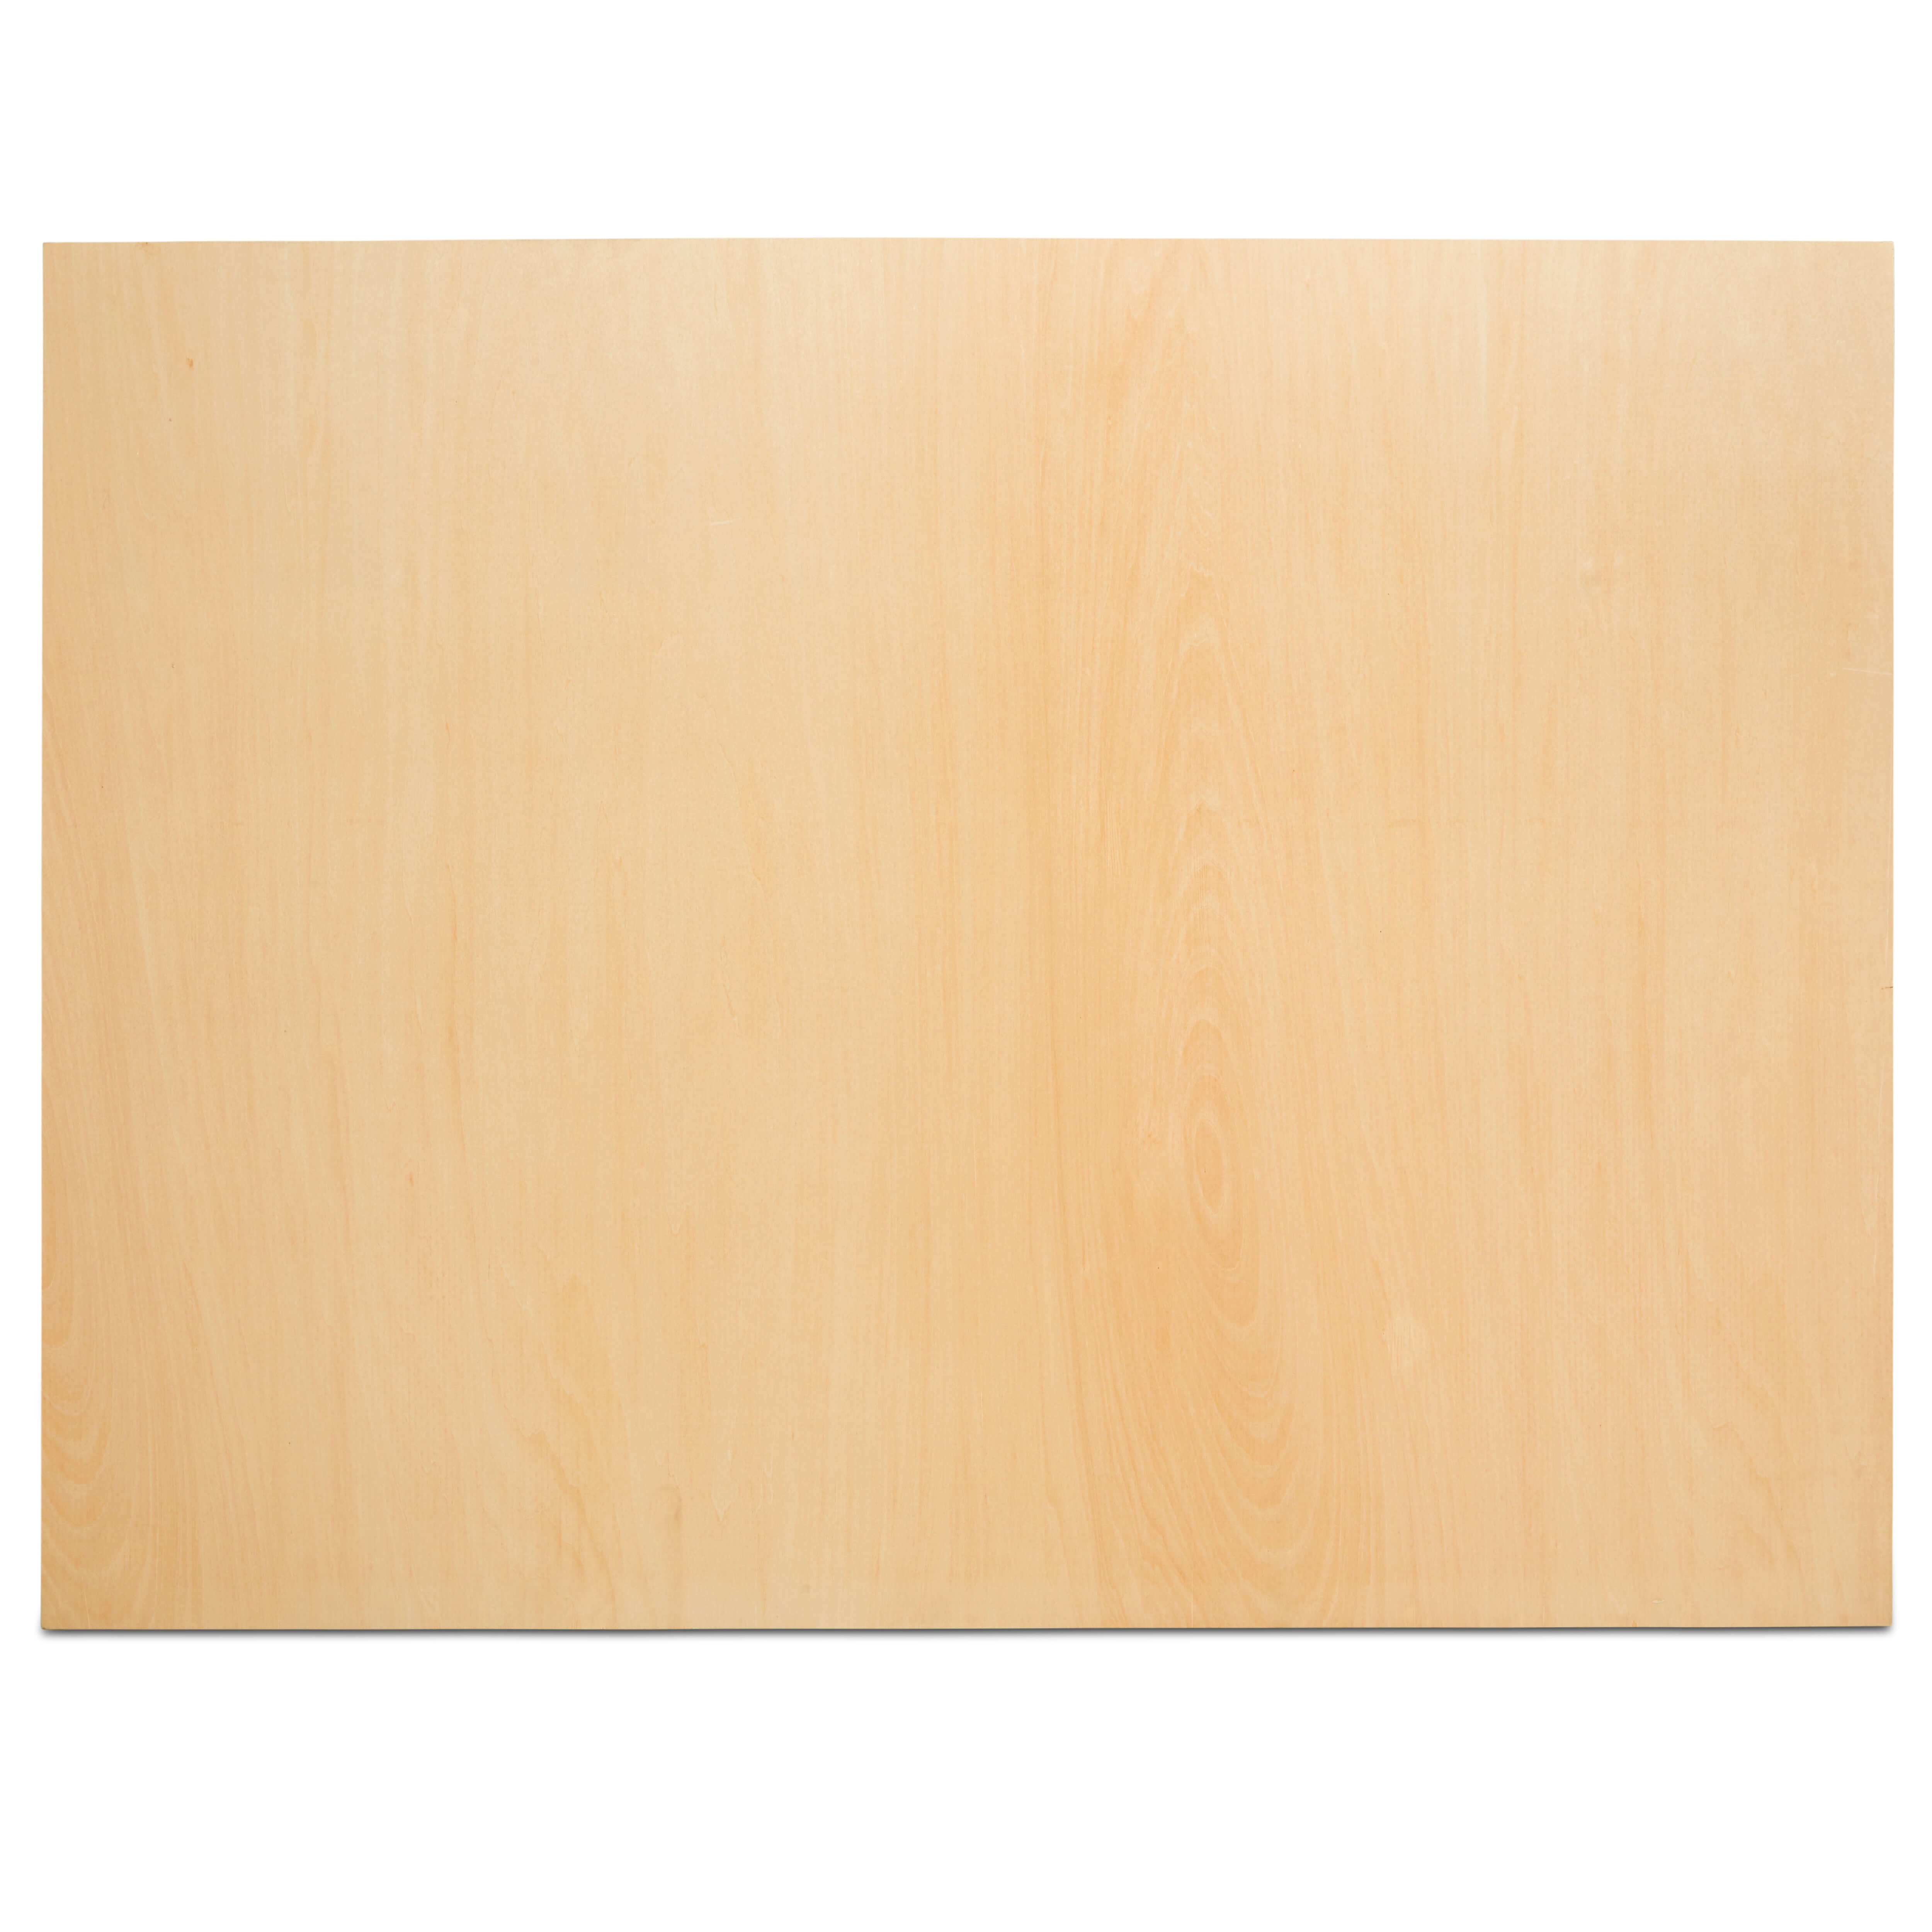 Birch Painting Panel 14 x 18 x 3/4-inch, Pack of 2 Wood Canvas Boards for  Painting, Blank Signs for Crafts, by Woodpeckers 